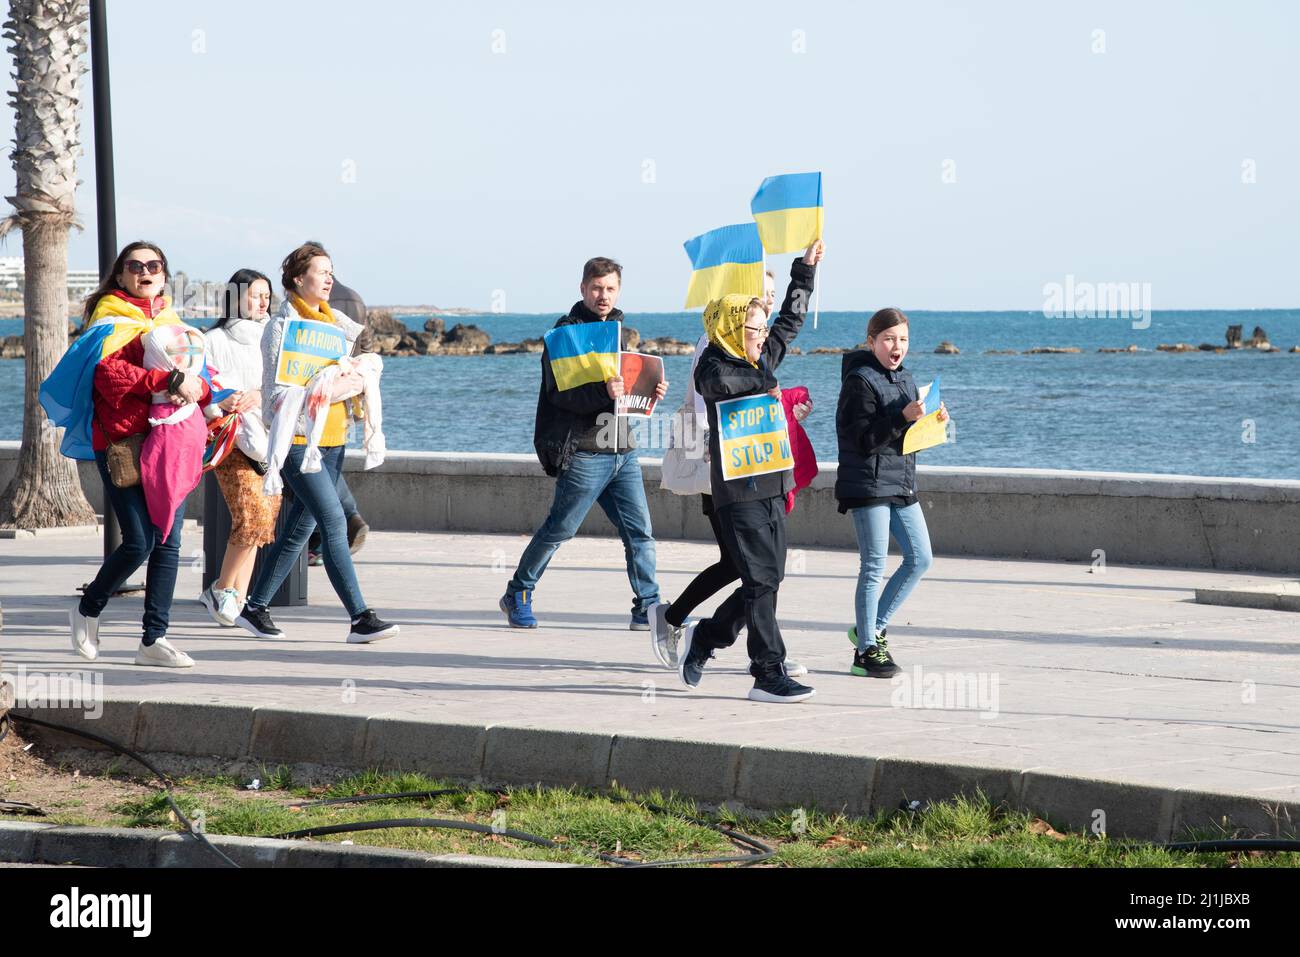 Protest against Russian invasion of Ukraine at Paphos harbour in Cyprus. Stock Photo